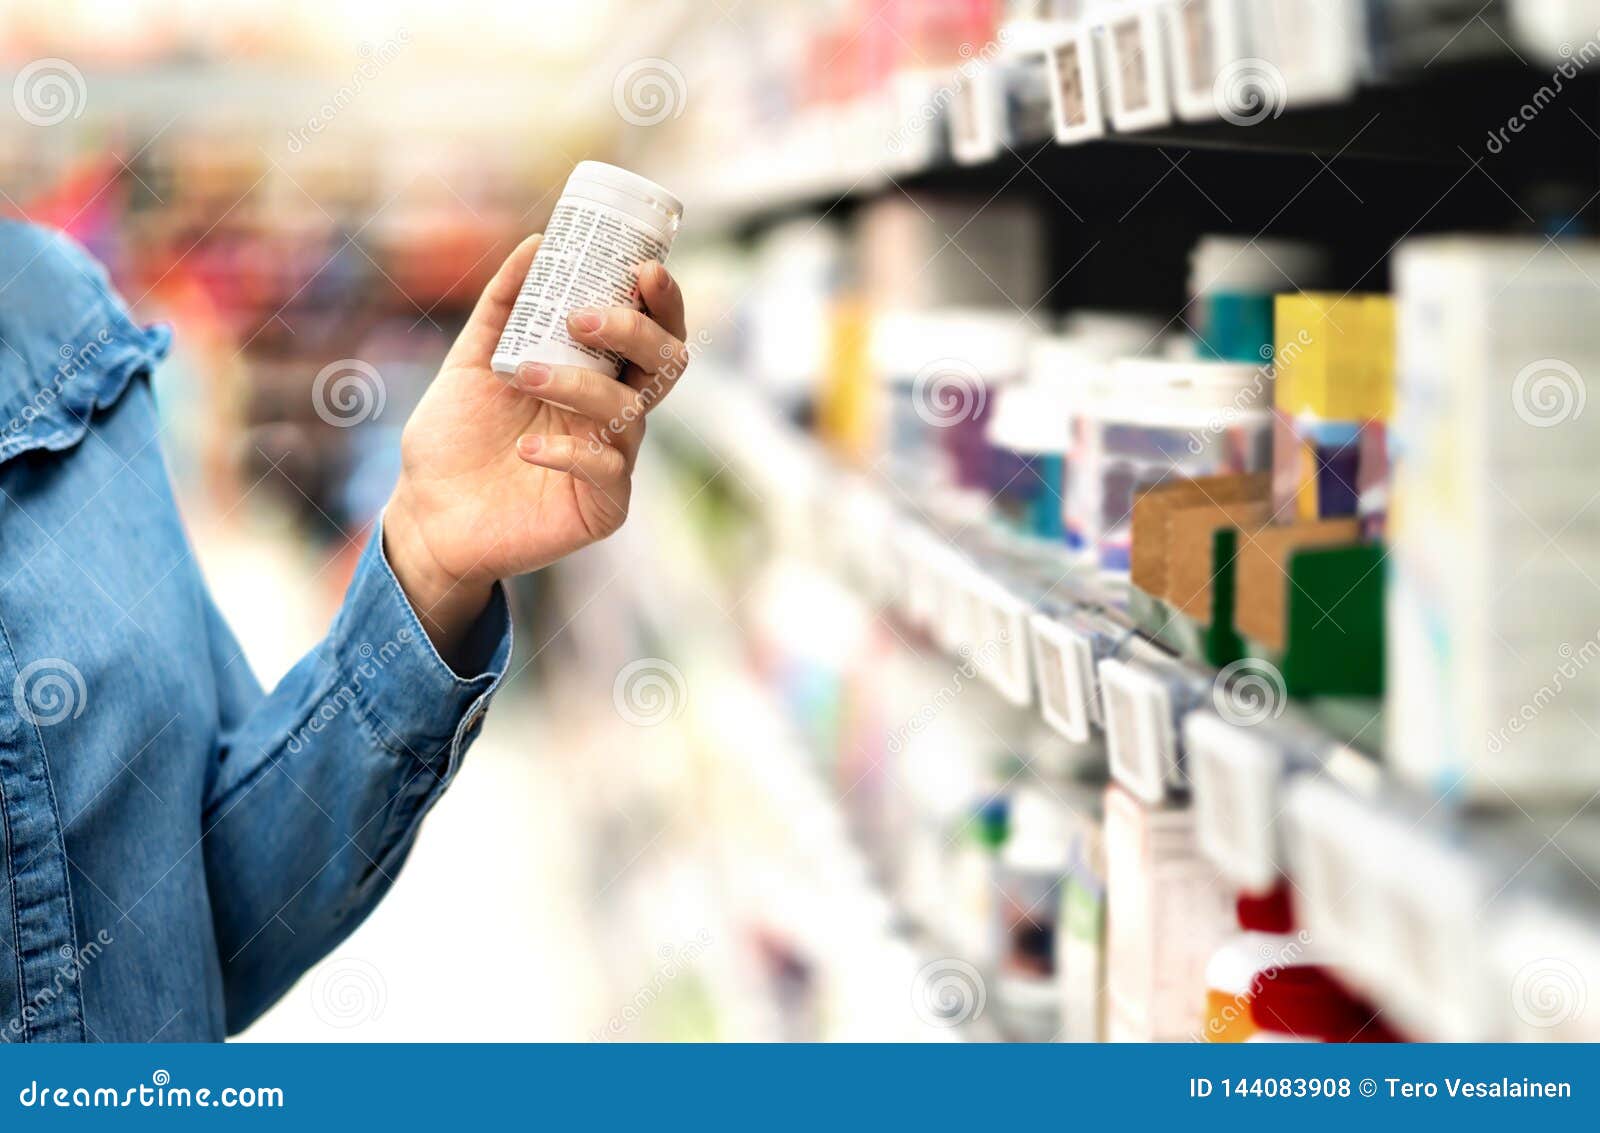 customer in pharmacy holding medicine bottle. woman reading the label text about medical information or side effects in drug store